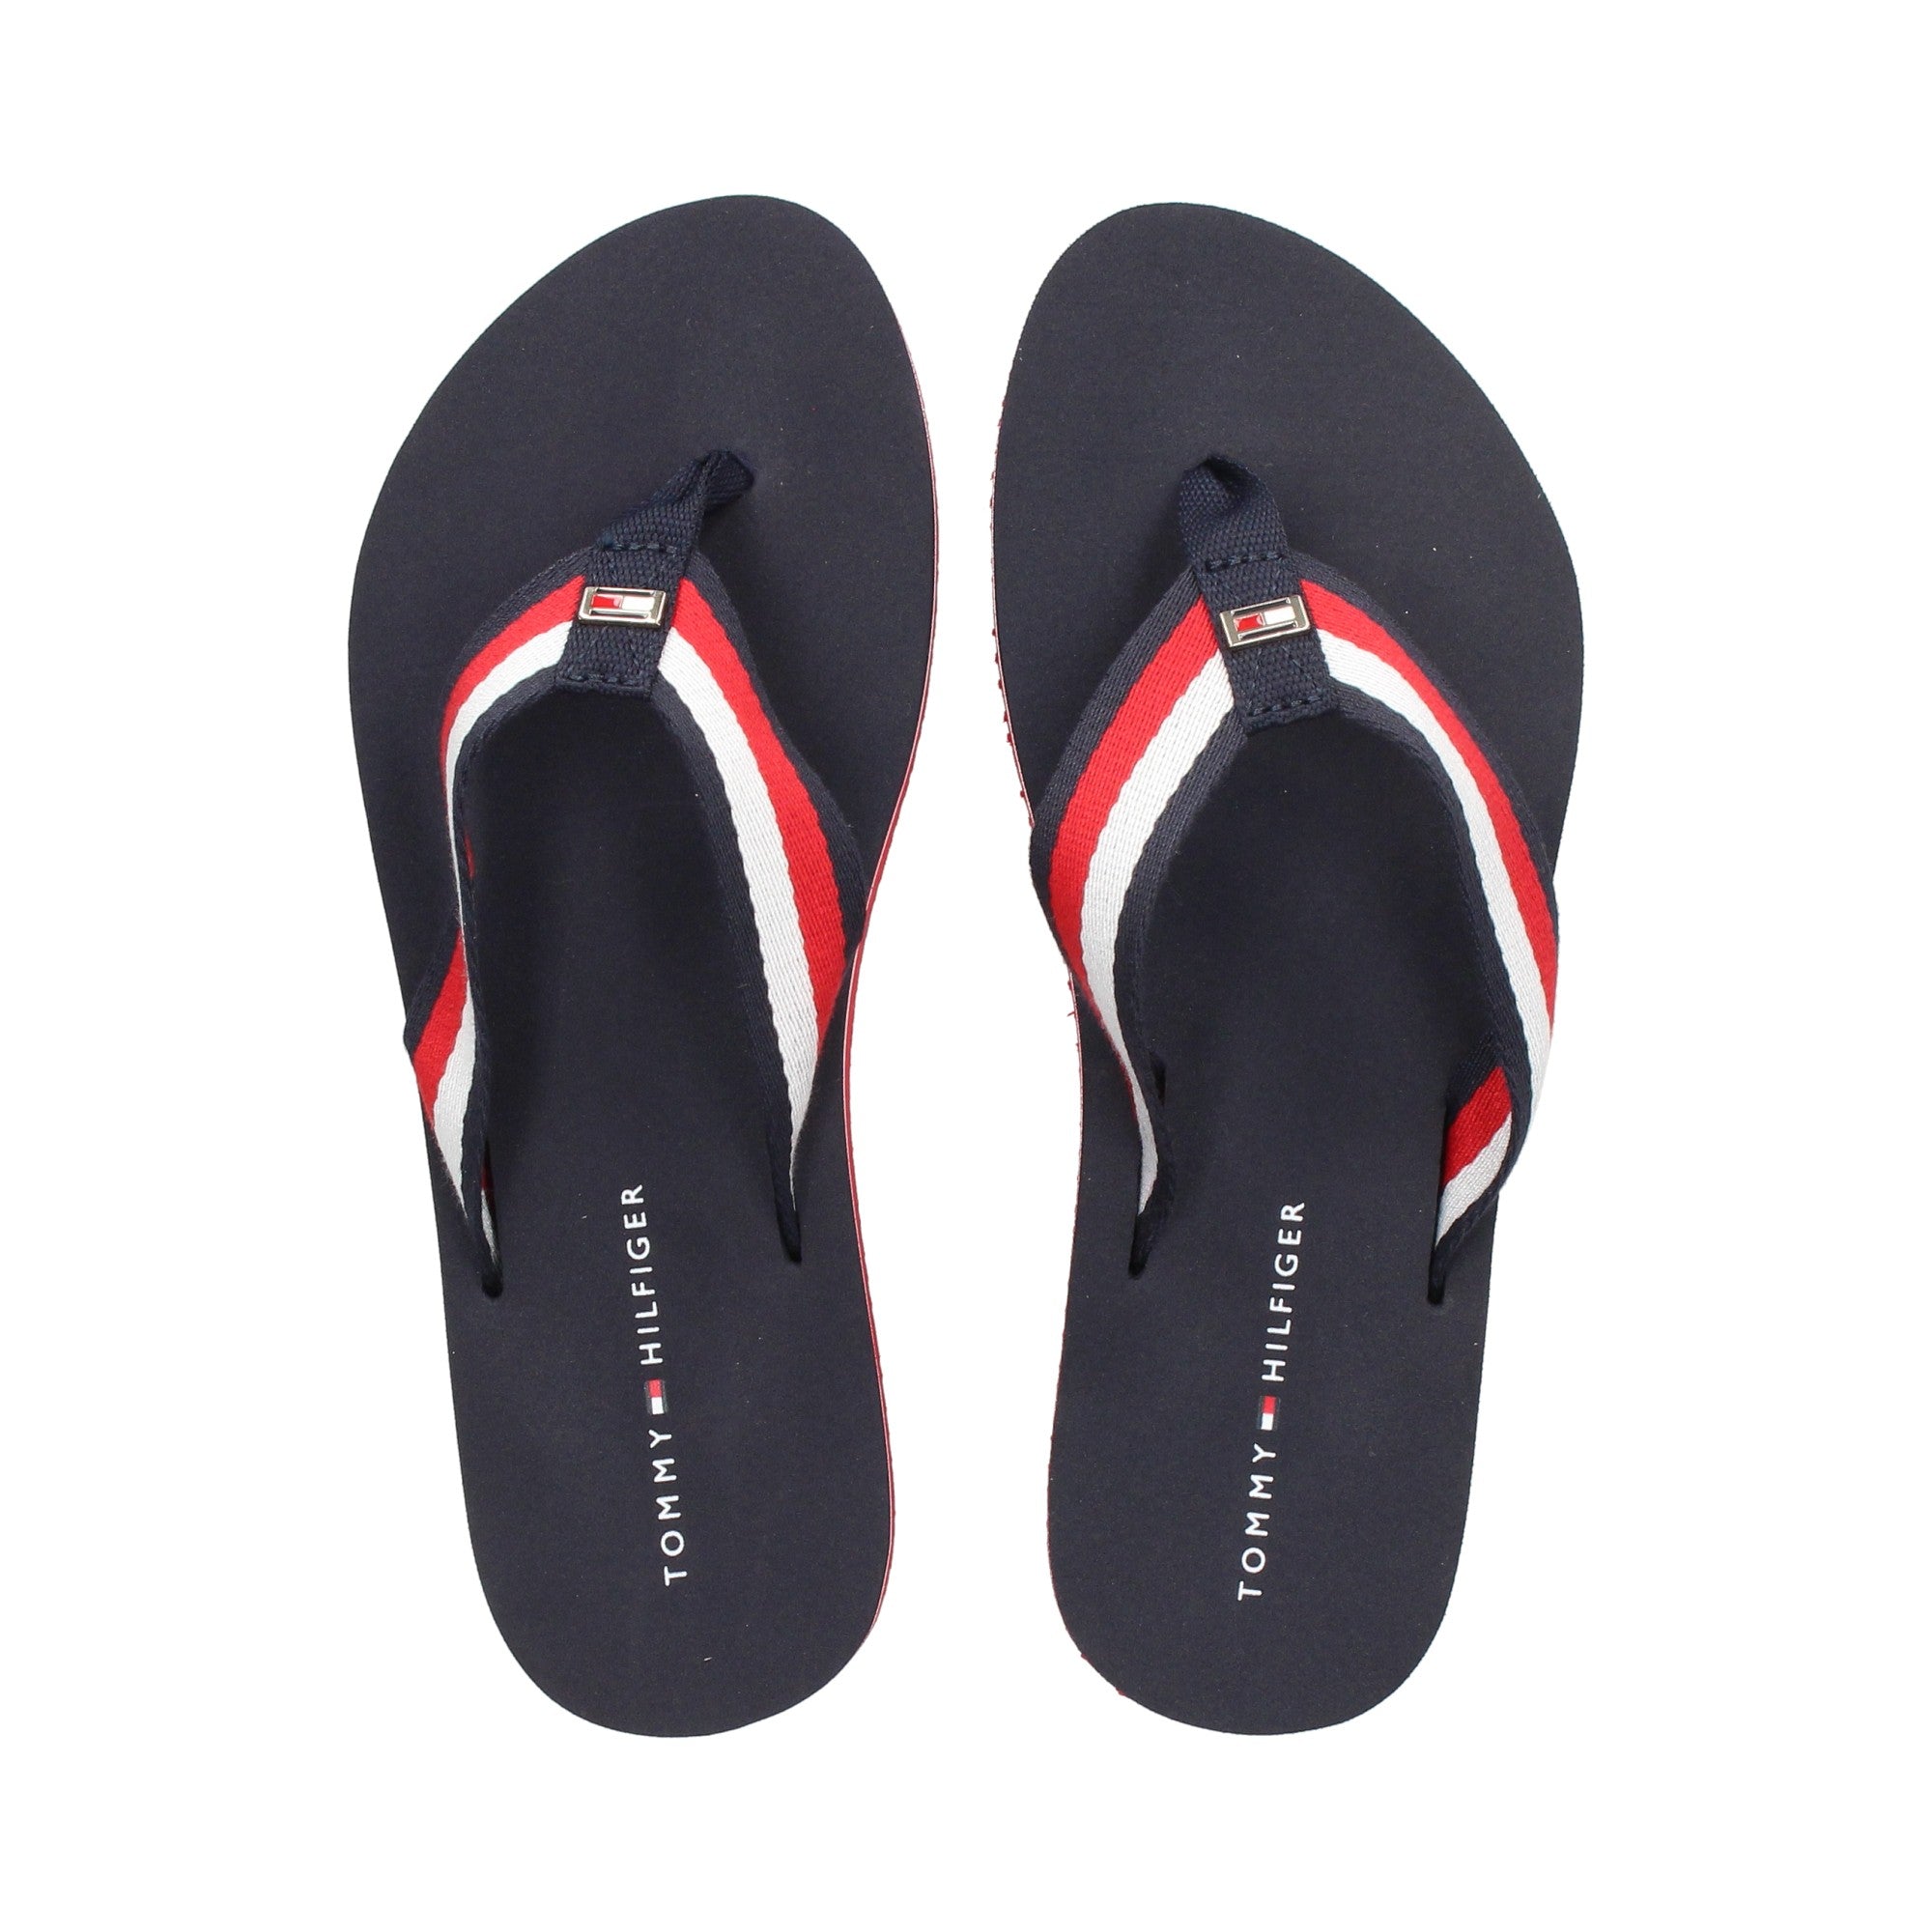 TOMMY HILFIGER Corporate Beach Sandal Navy/Red/White